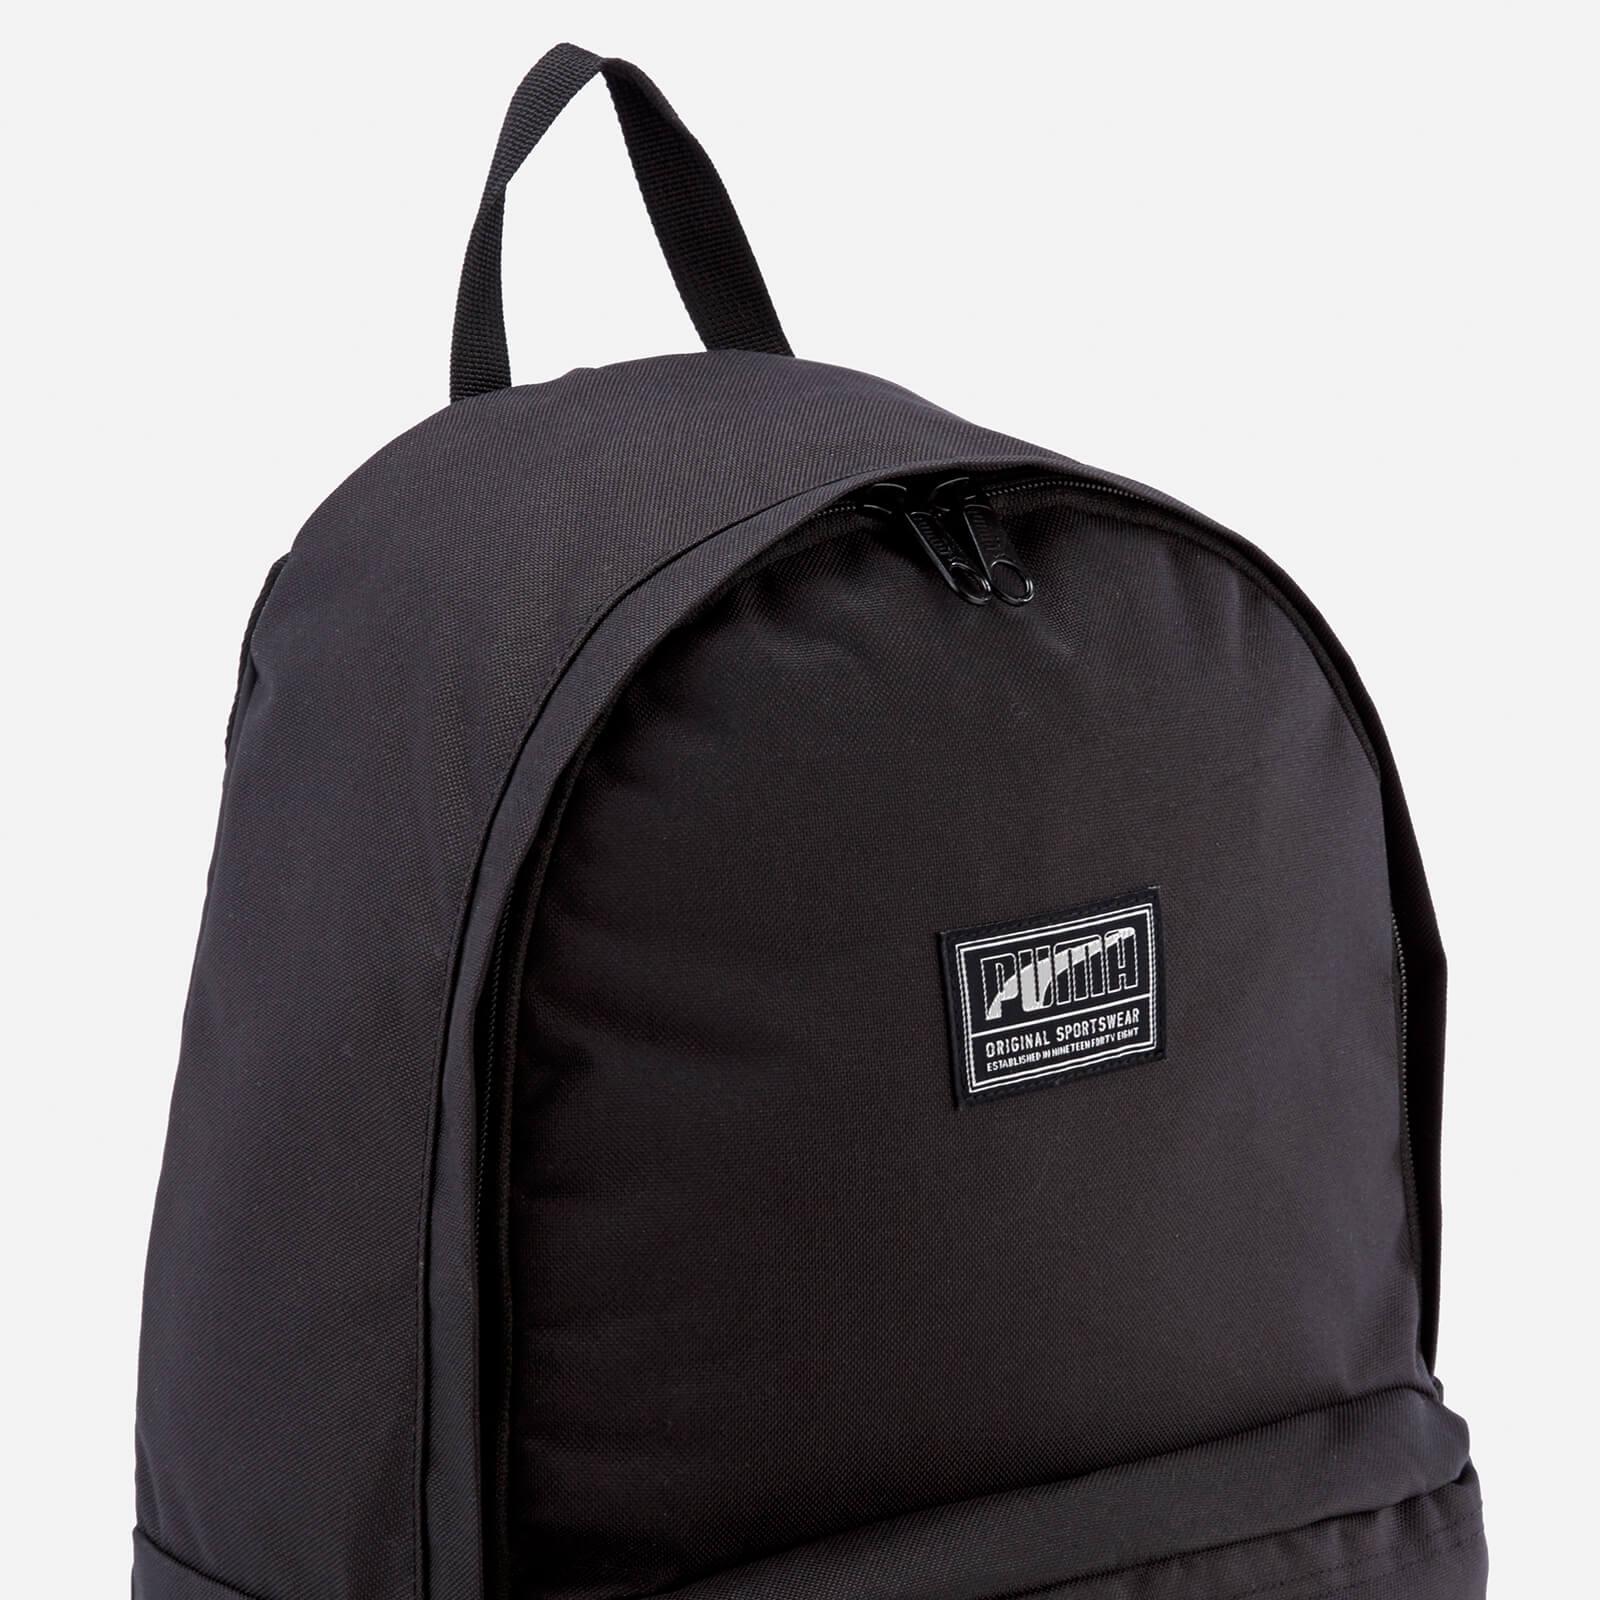 PUMA Synthetic Academy Backpack in Black for Men - Lyst